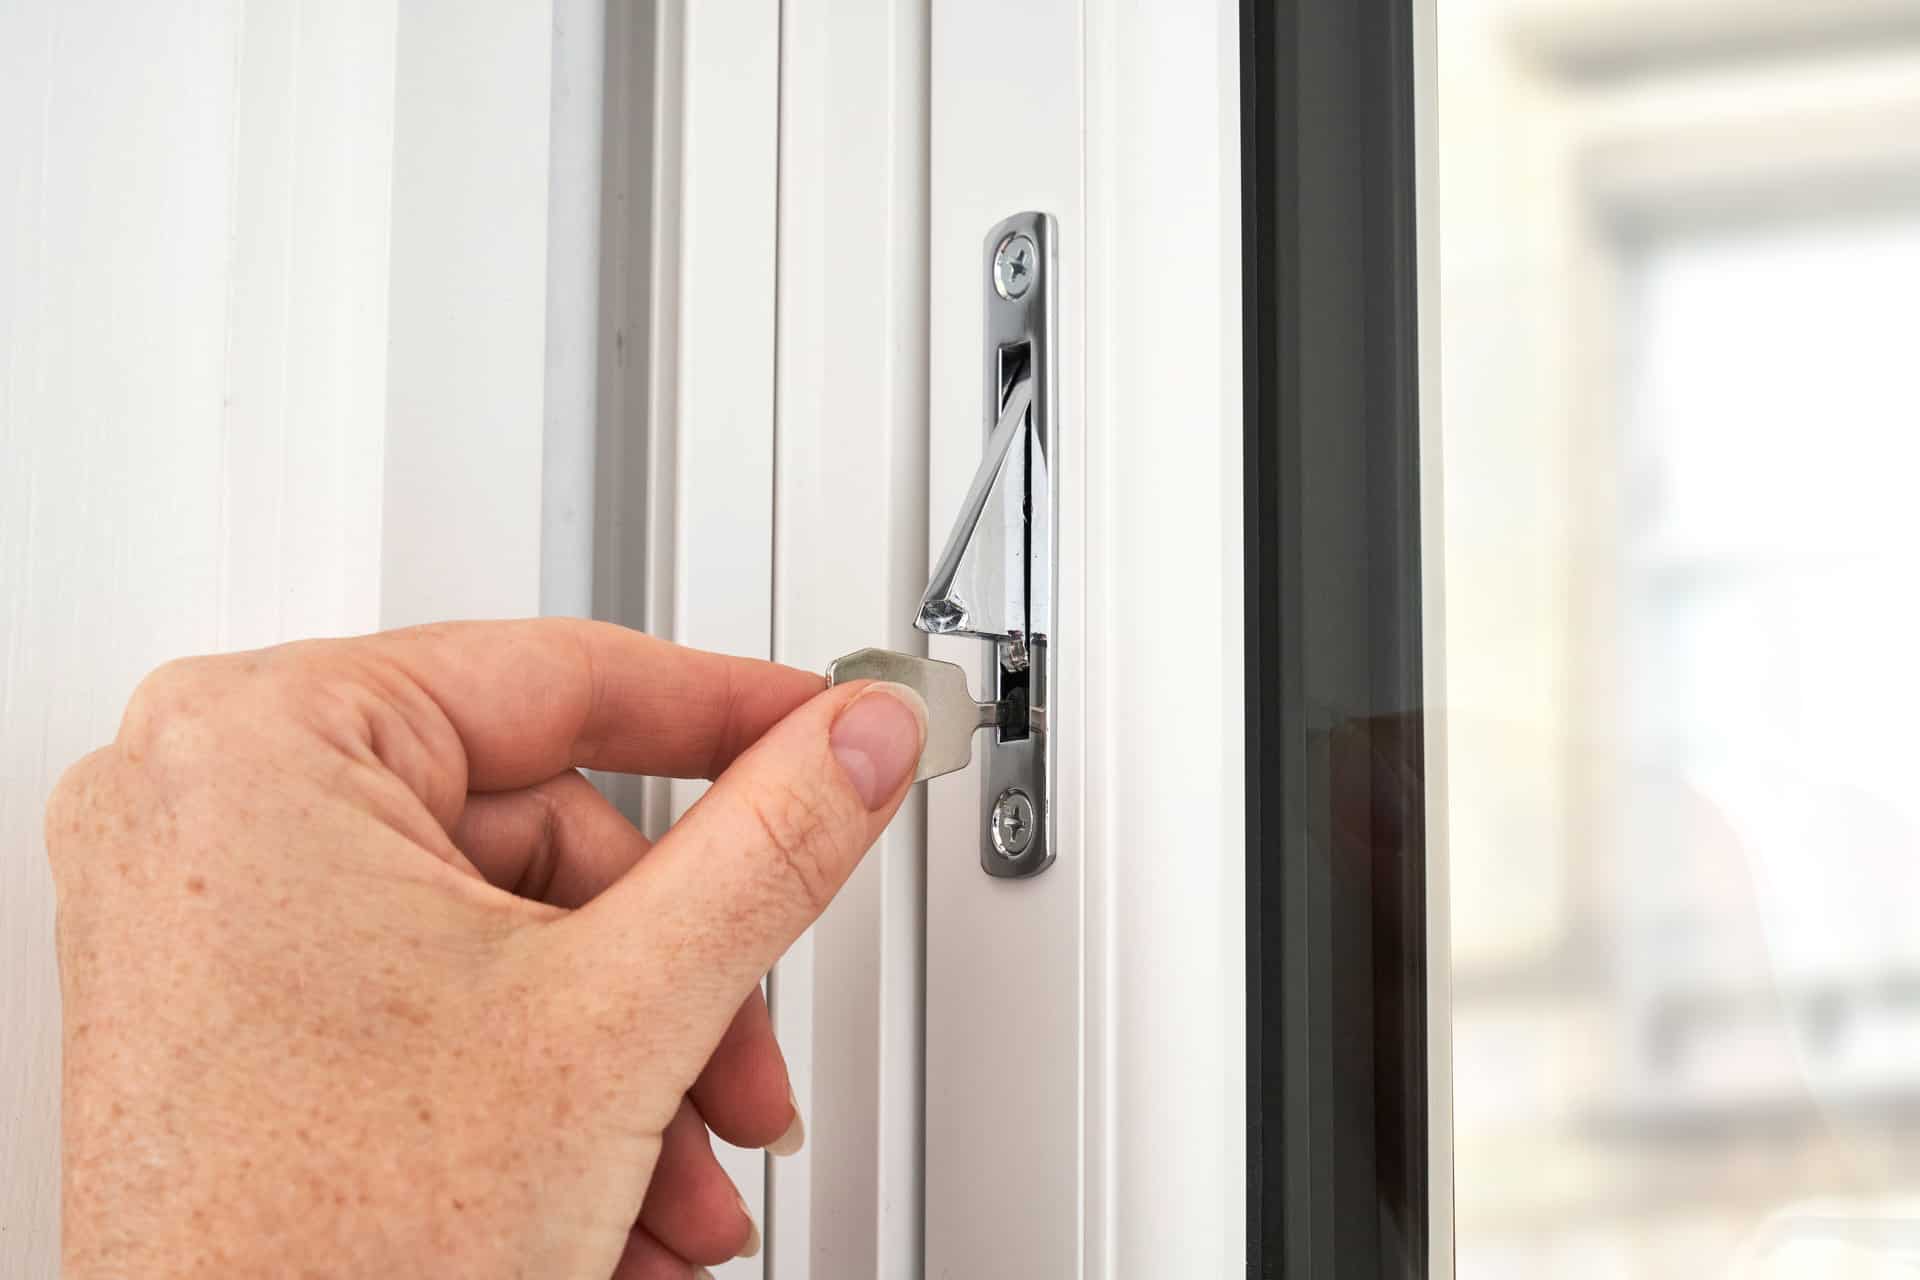 Close up demonstration of the key required to deactivate the sliding sash travel restrictor